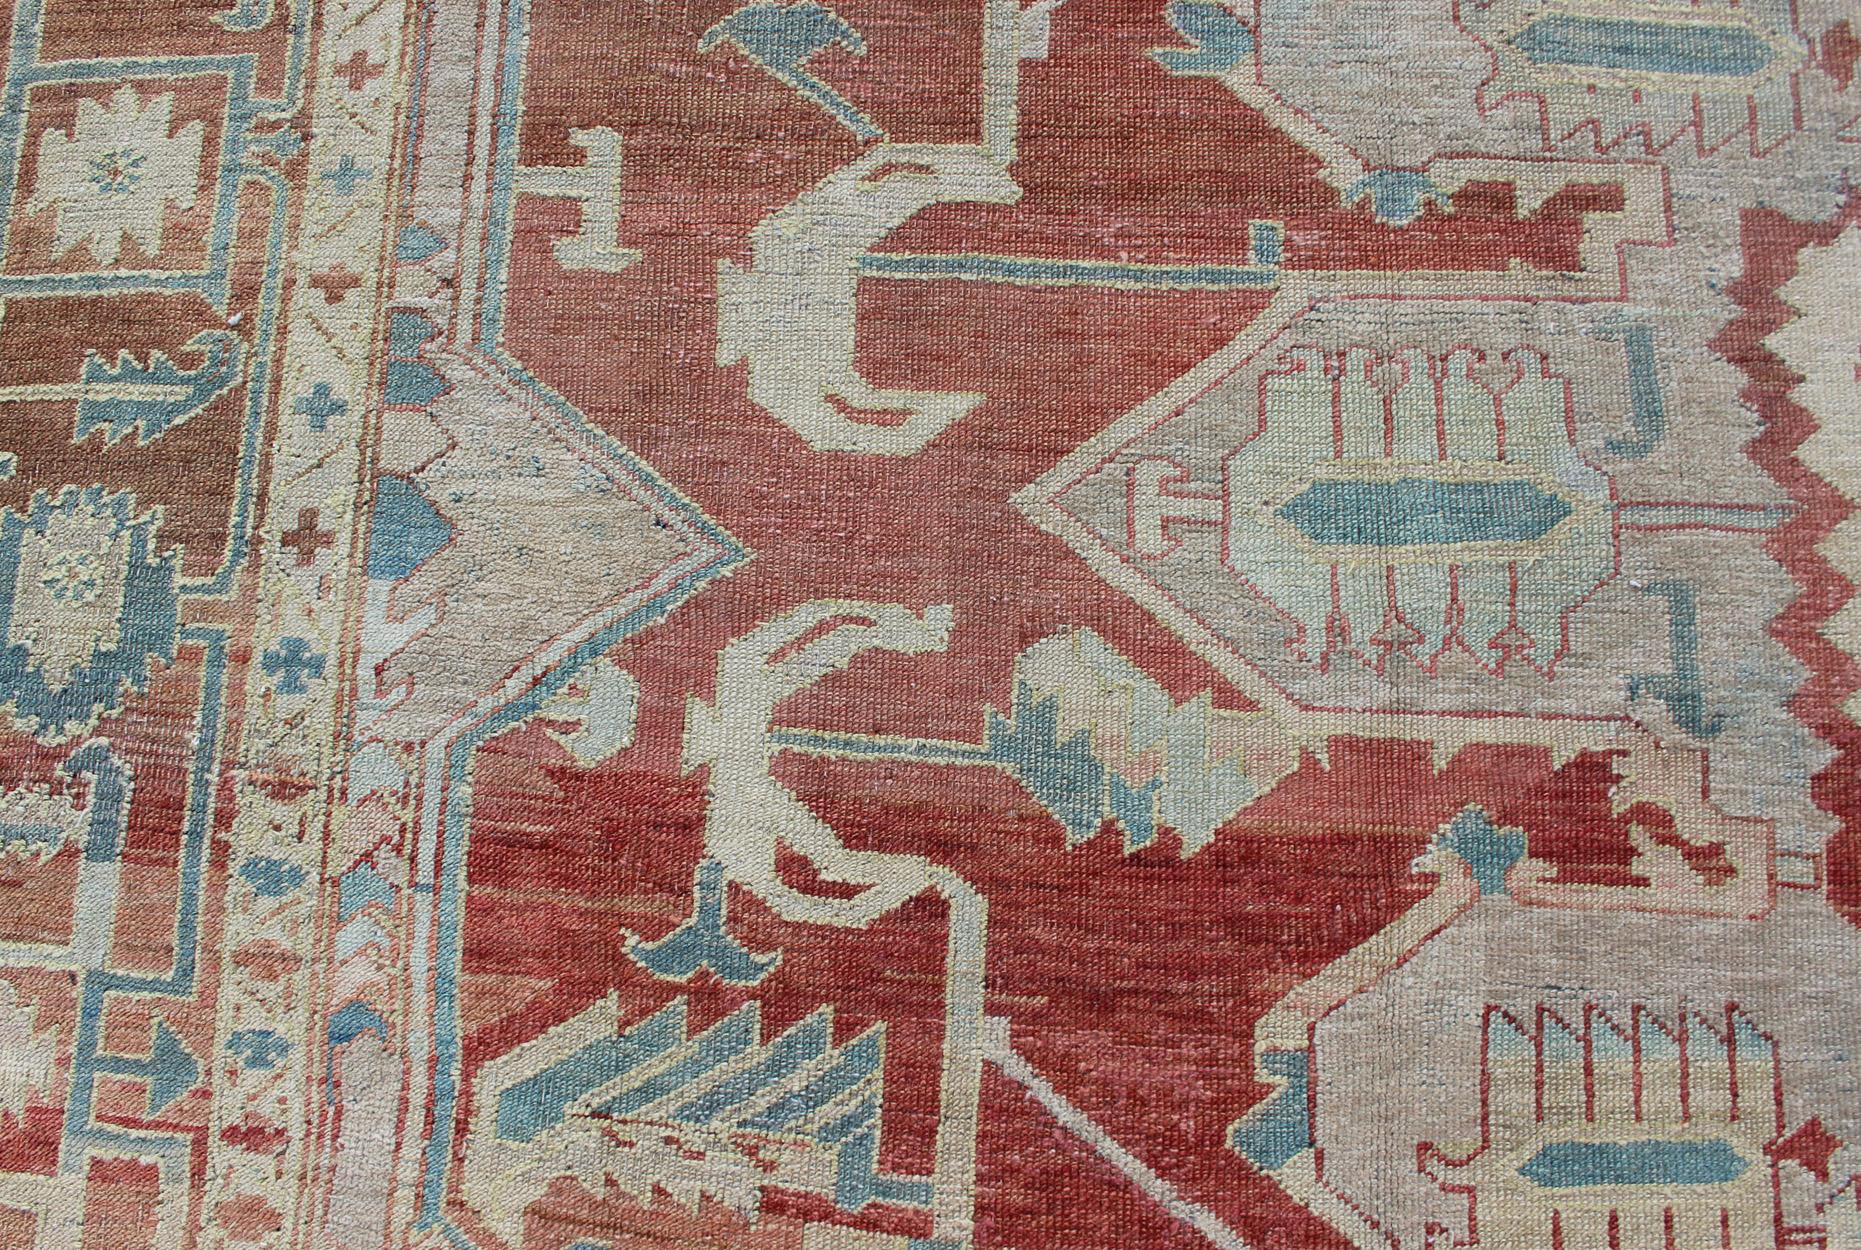 Antique Persian Large Serapi Rug in Soft Red, Taupe, Light Teal and Blue For Sale 1